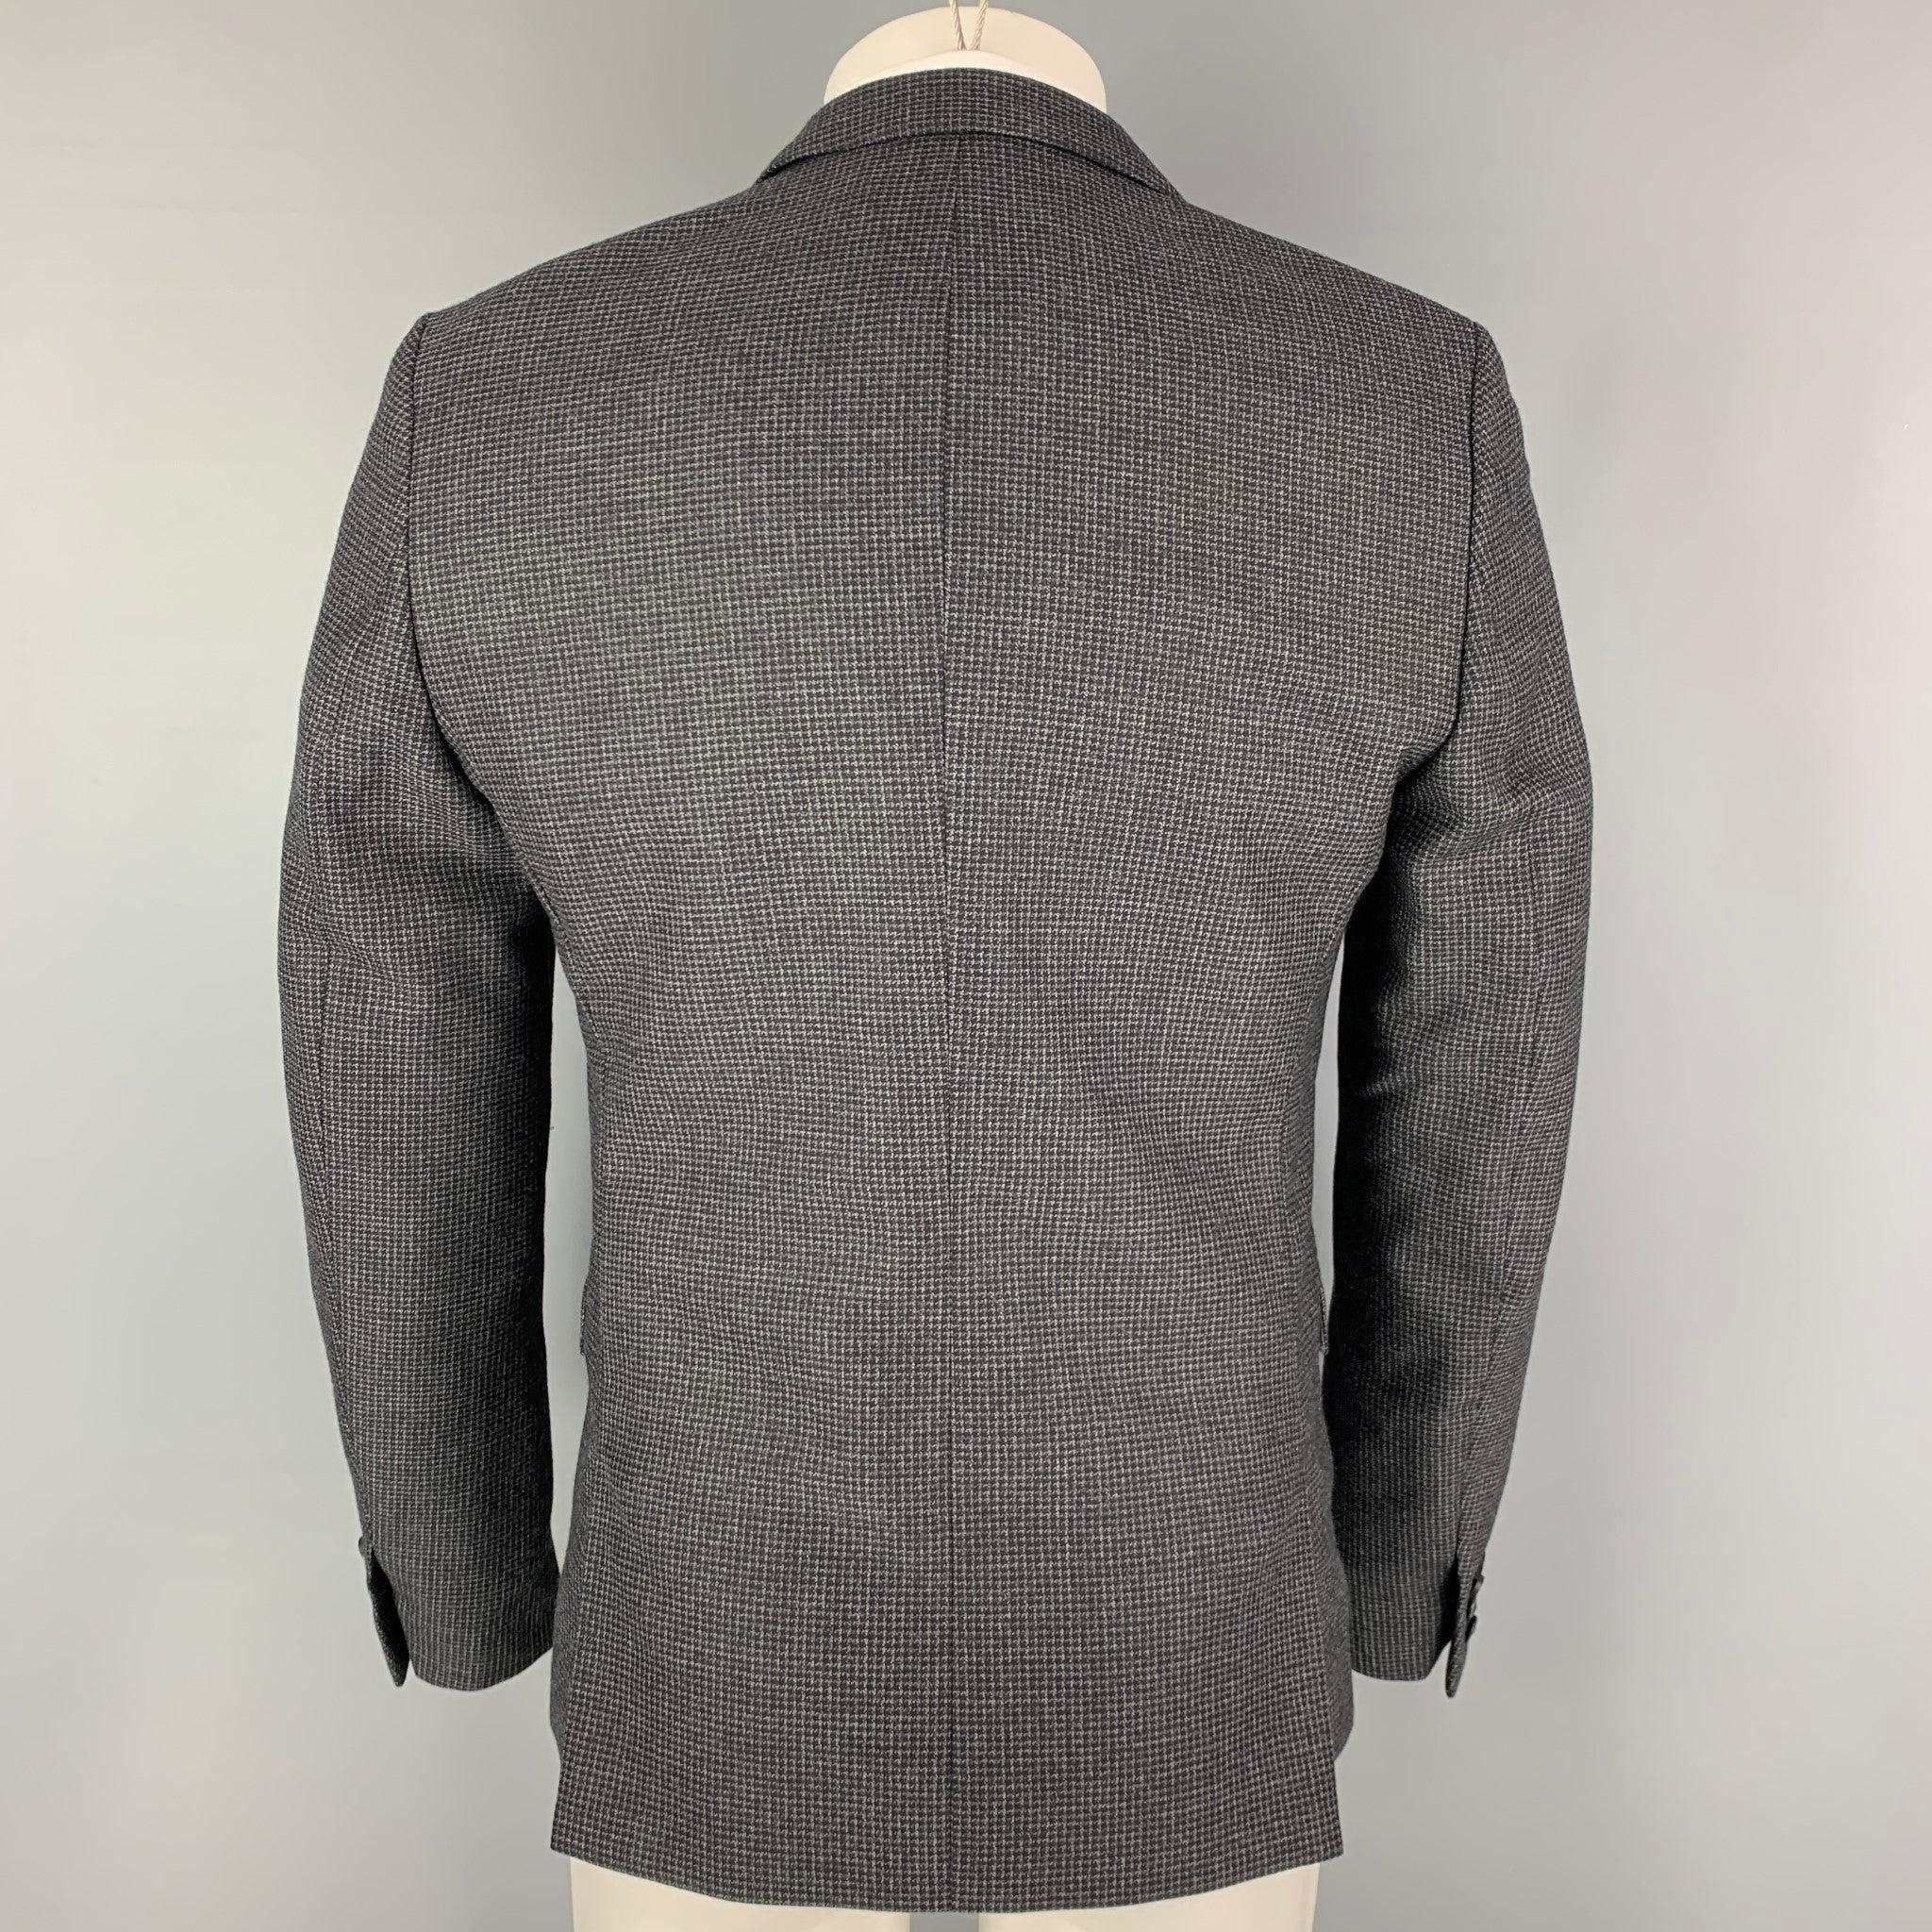 THE KOOPLES Size 36 Charcoal Grey Grid Wool Notch Lapel Sport Coat In Good Condition For Sale In San Francisco, CA